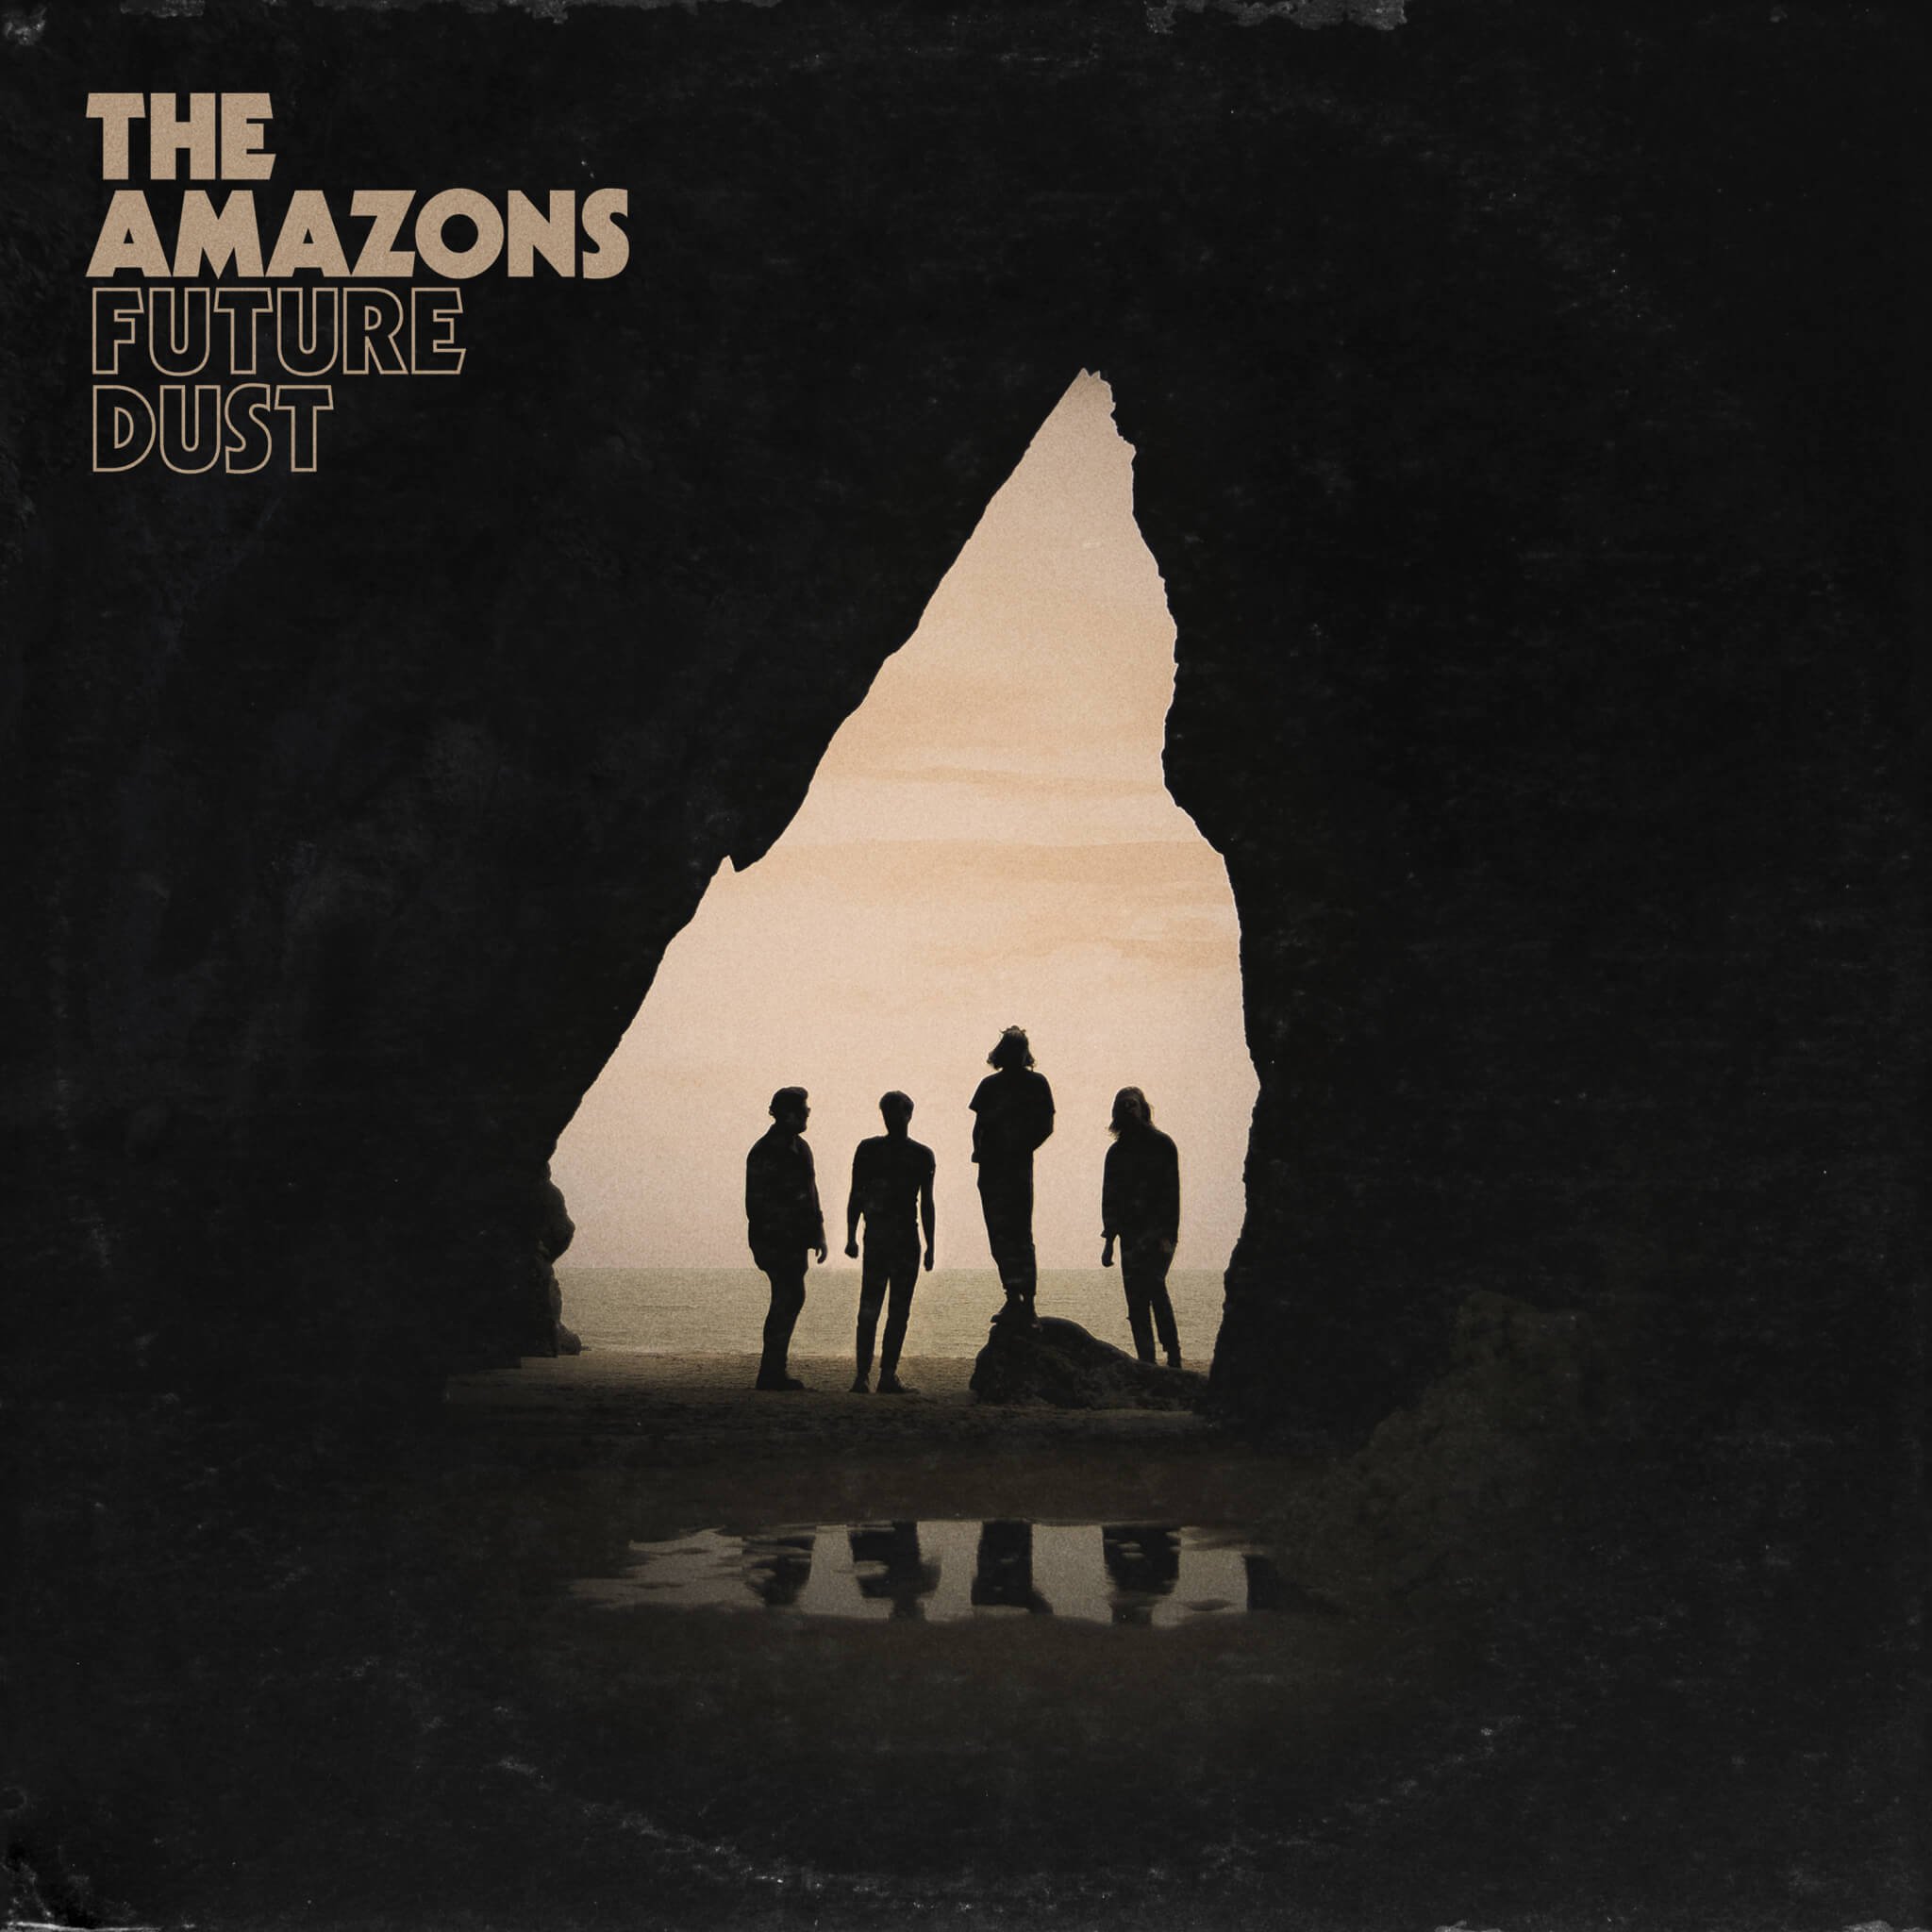 The Amazons "Future Dust" CD